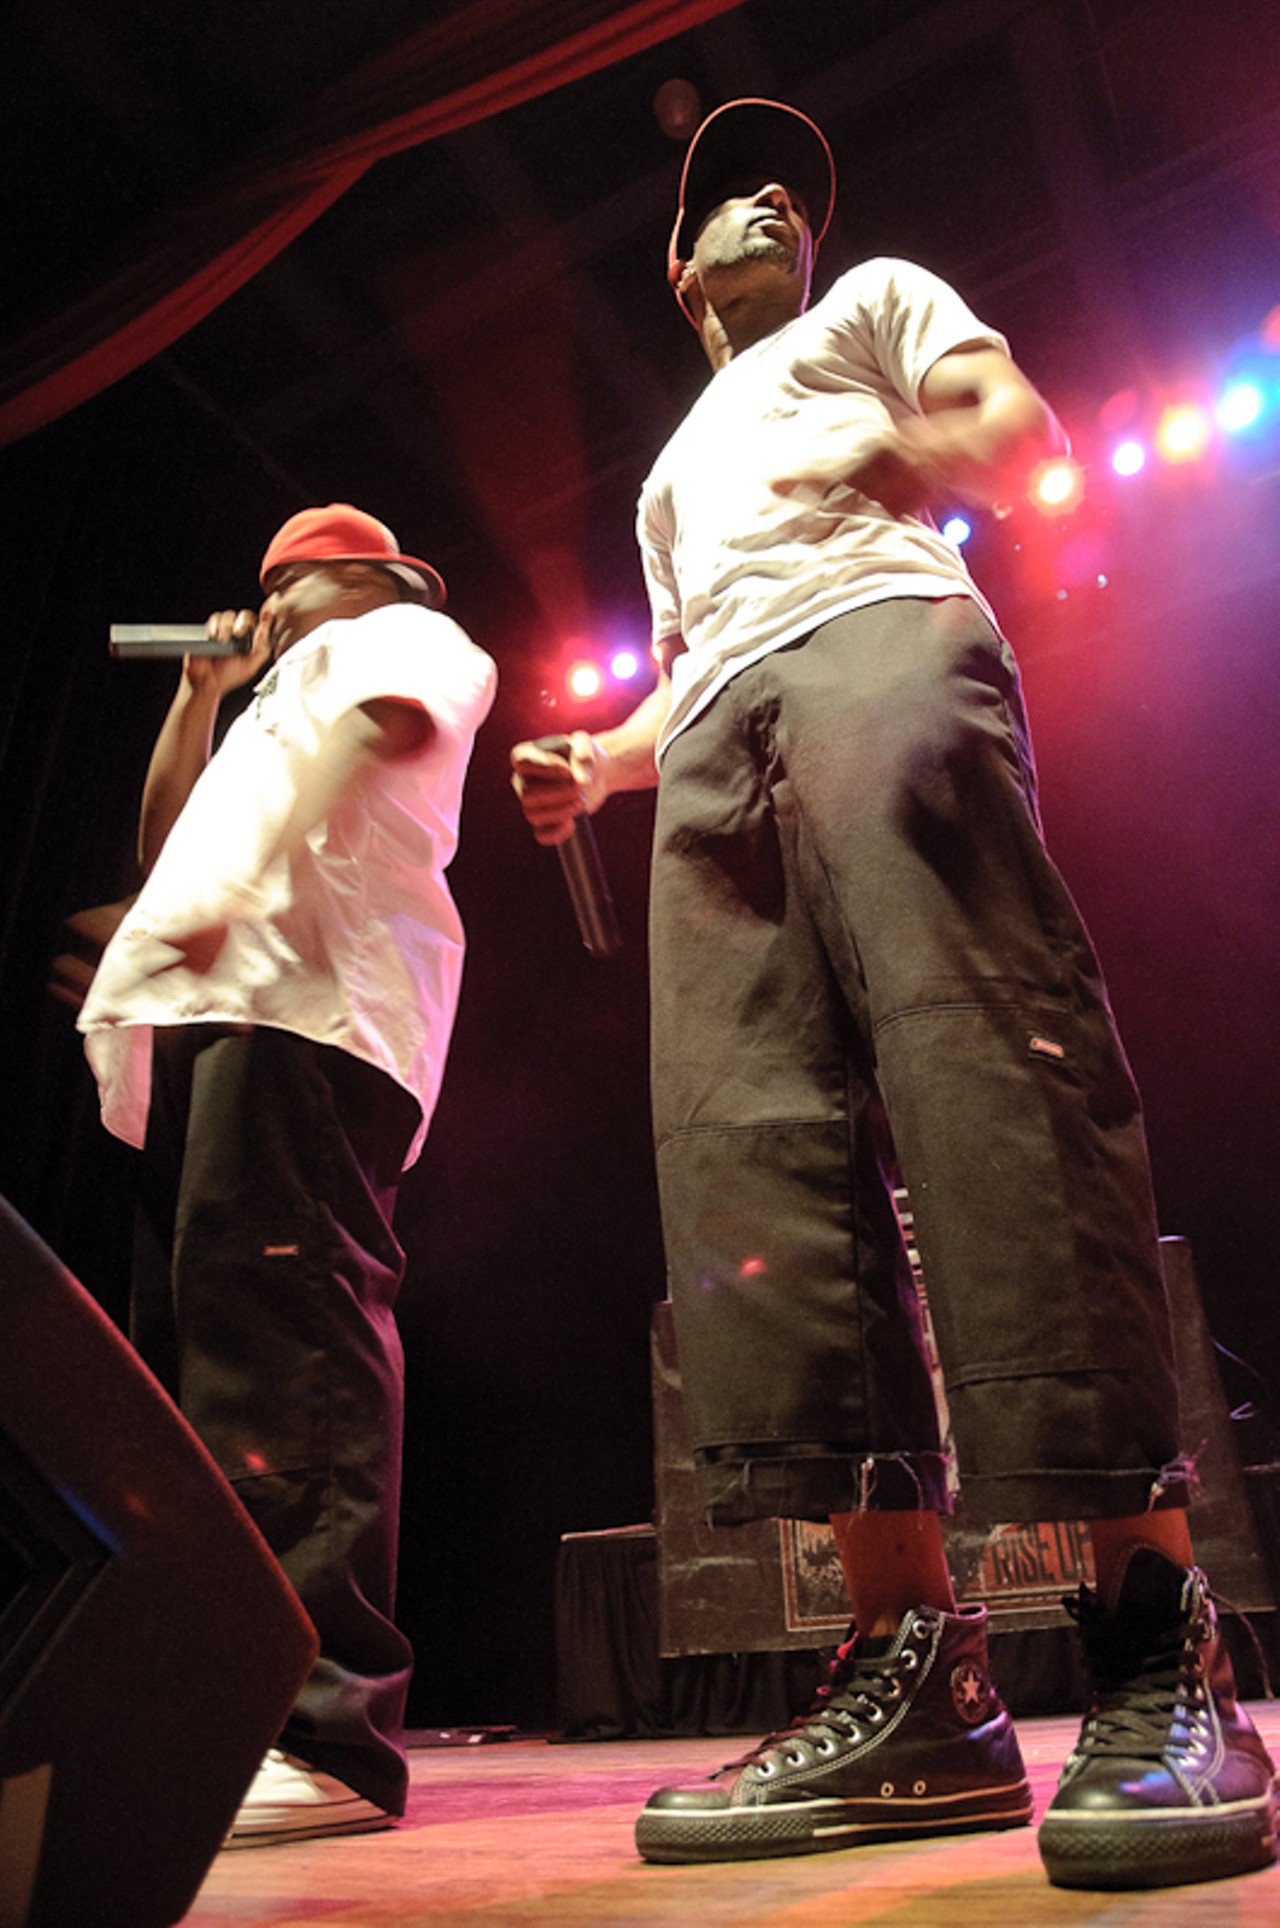 Stevie Stone opening for Cypress Hill at the Pageant.